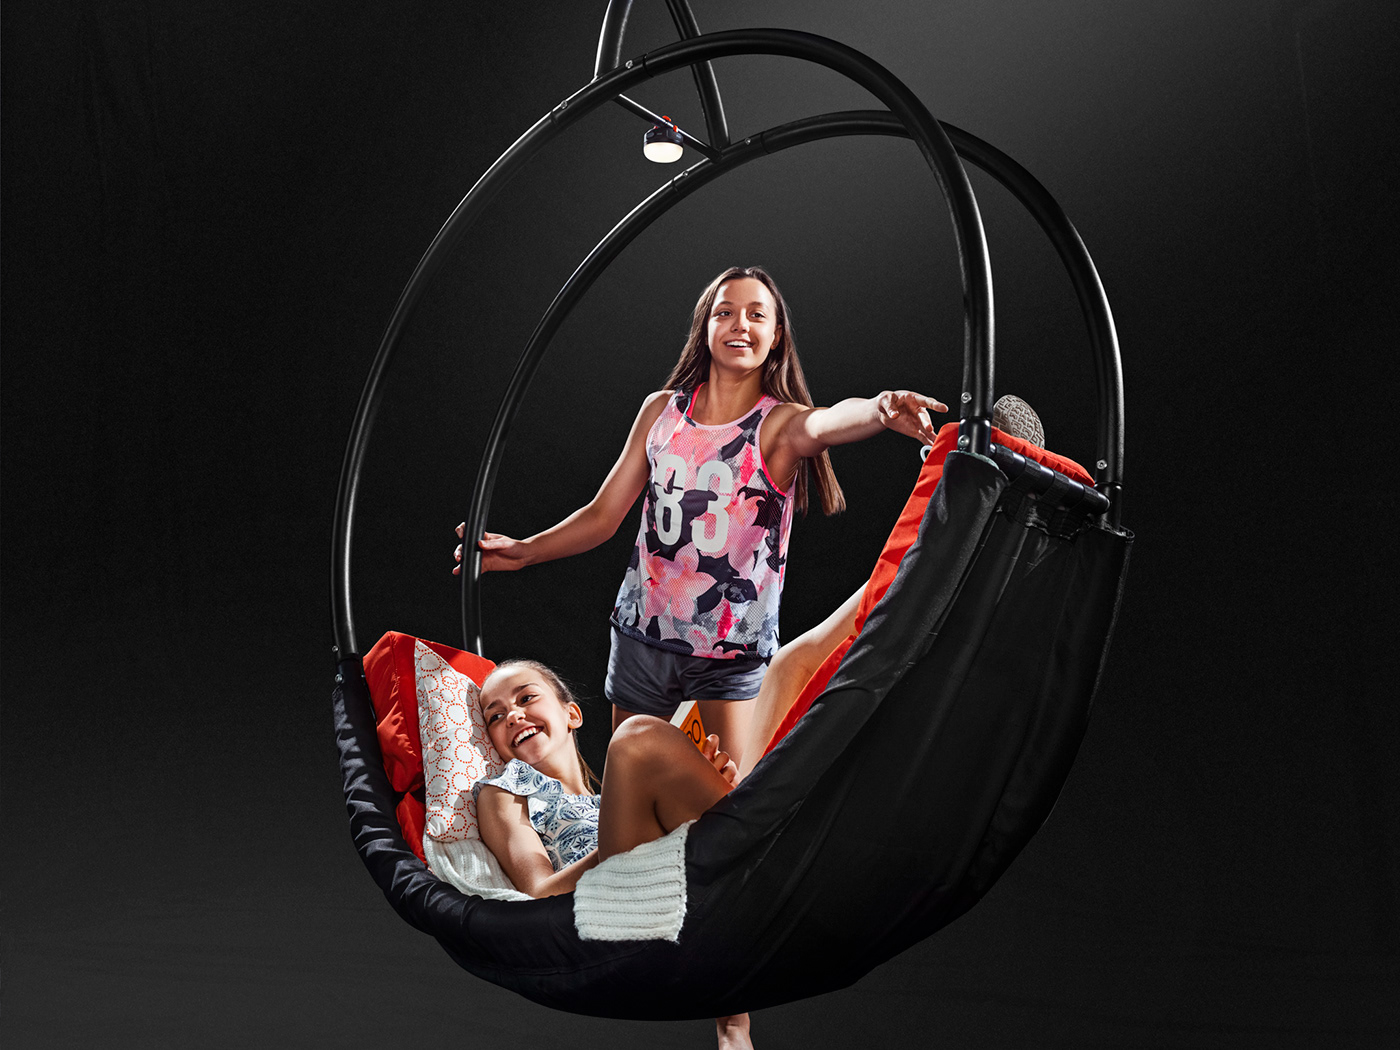 Vuly Play Swing monkeybars play studio sccud vuly The Creative Imagineers